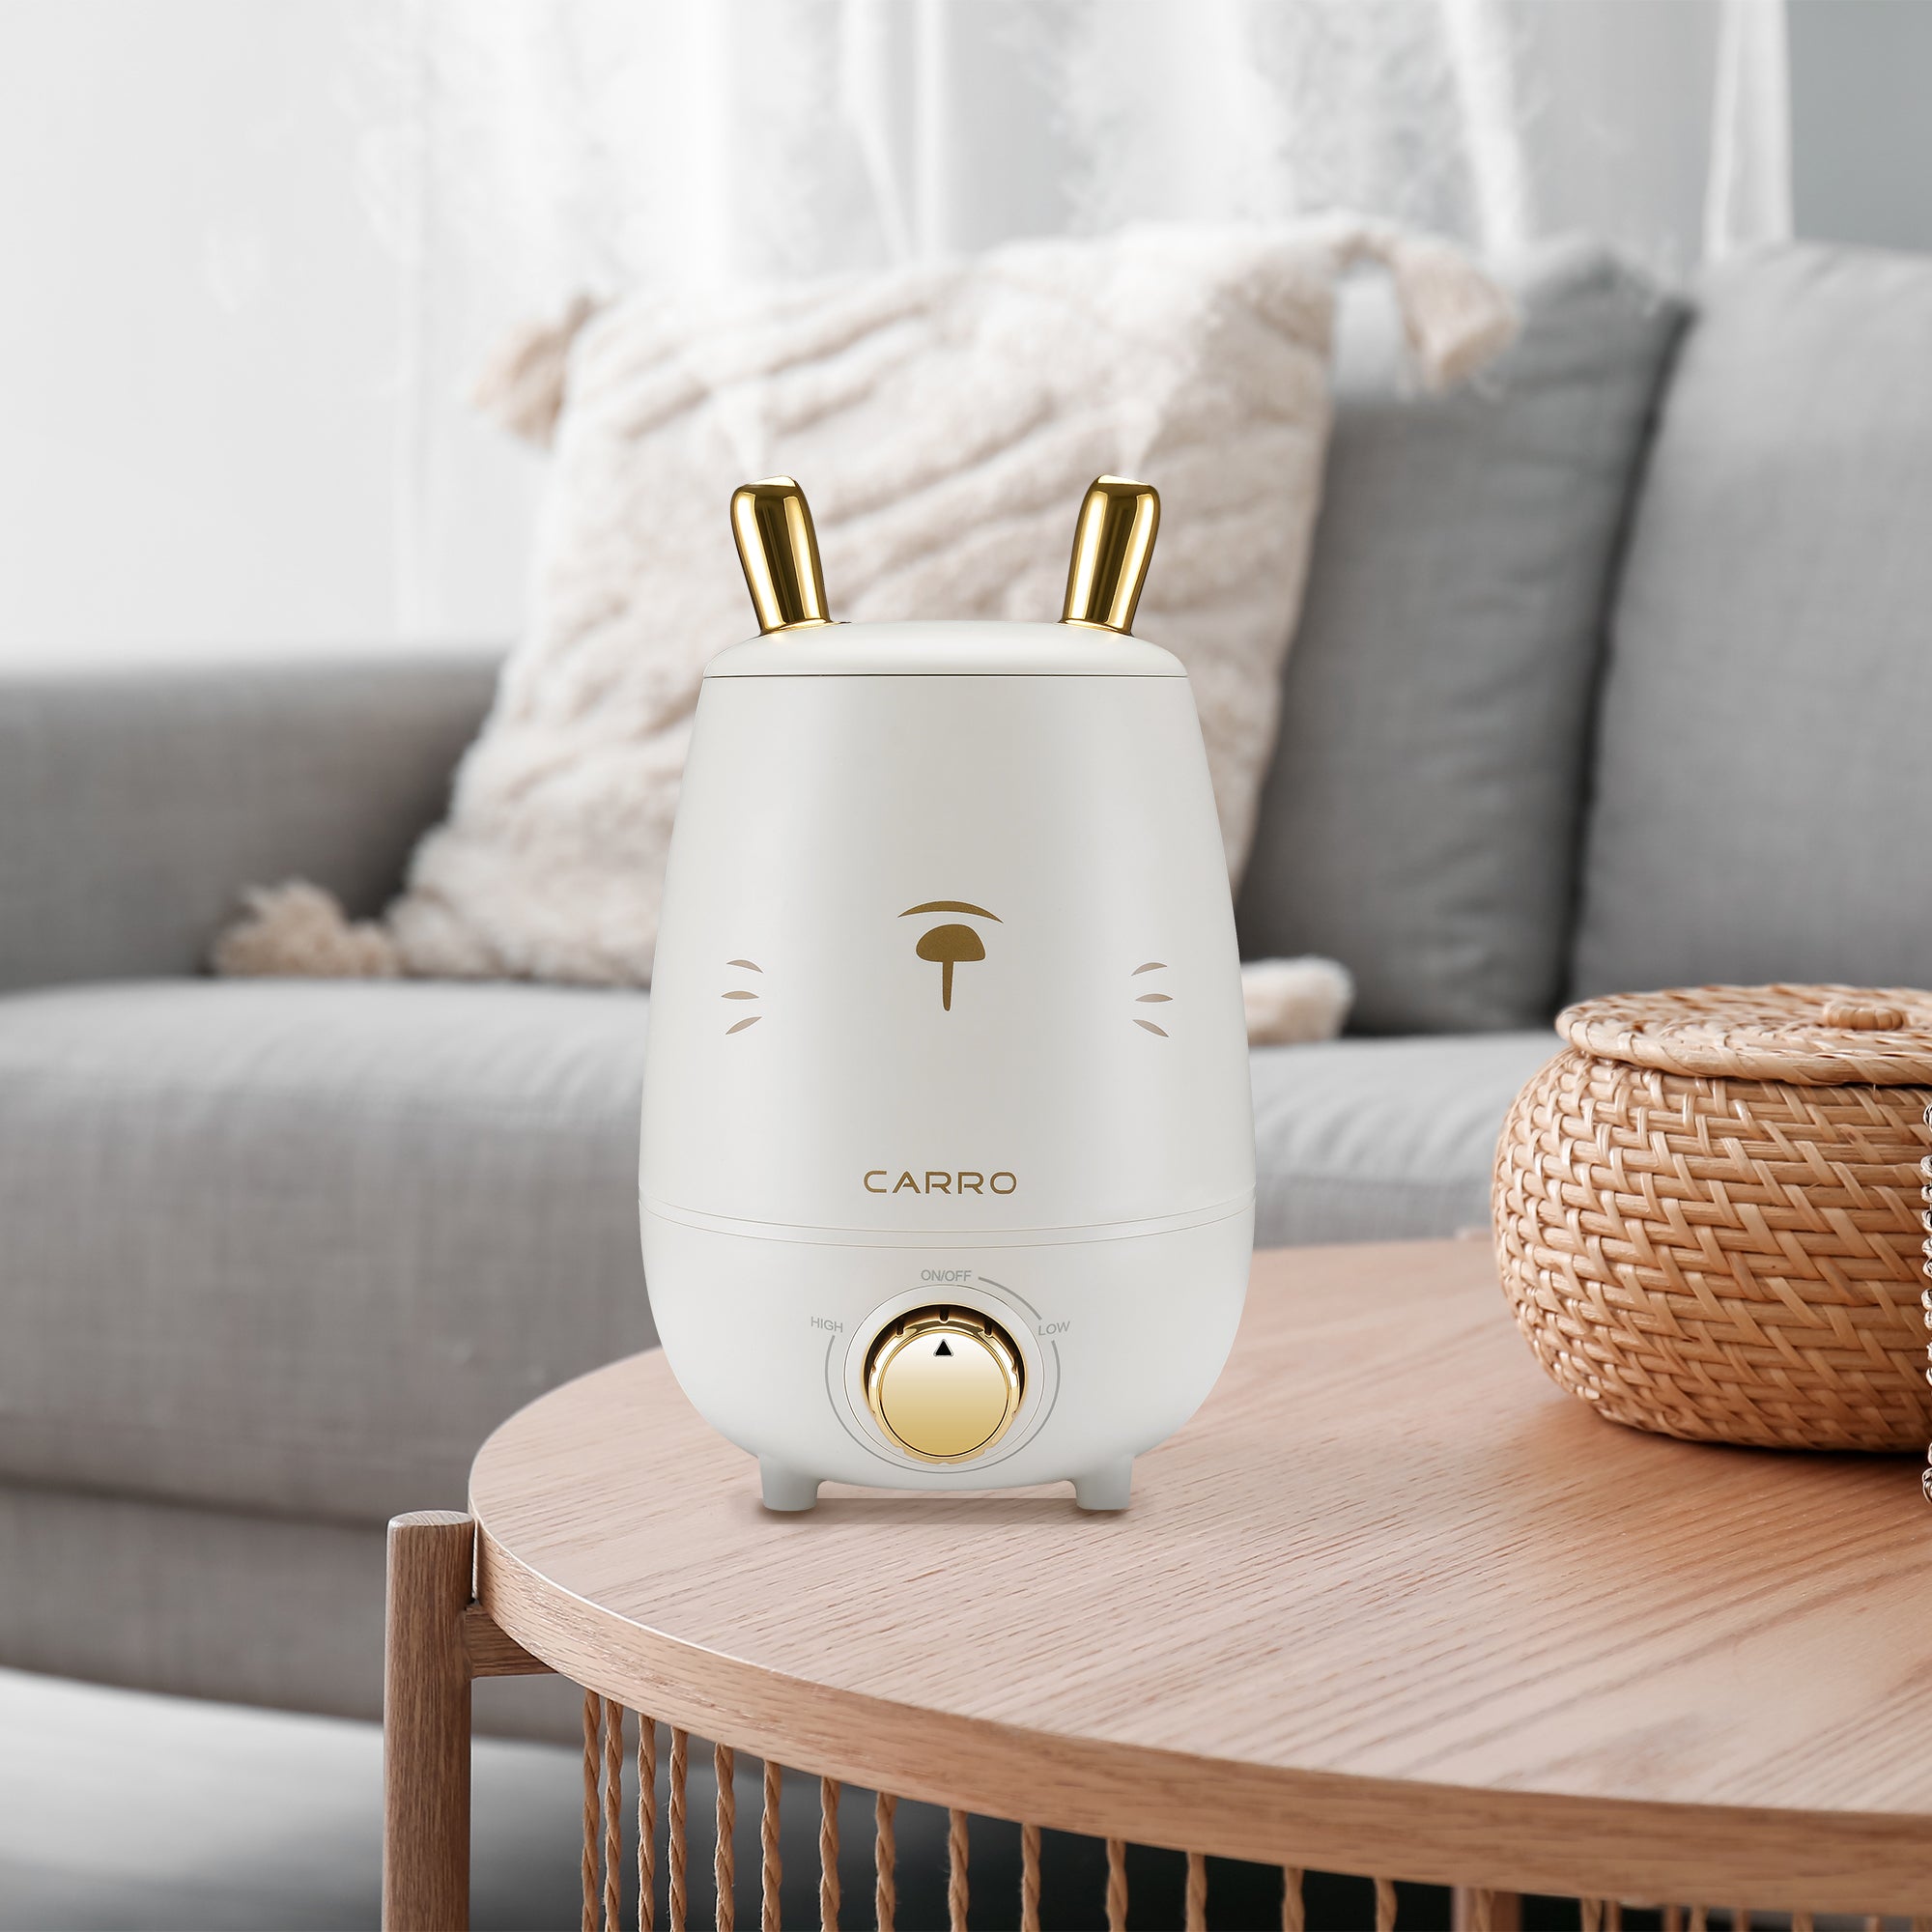 The Zukis humidifier quietly disperses a fine cool mist into the air providing relief from the dry air. This top fill humidifier has an optional aromatherapy tray so a few drops of essential oil can be added to create a relaxing atmosphere. 